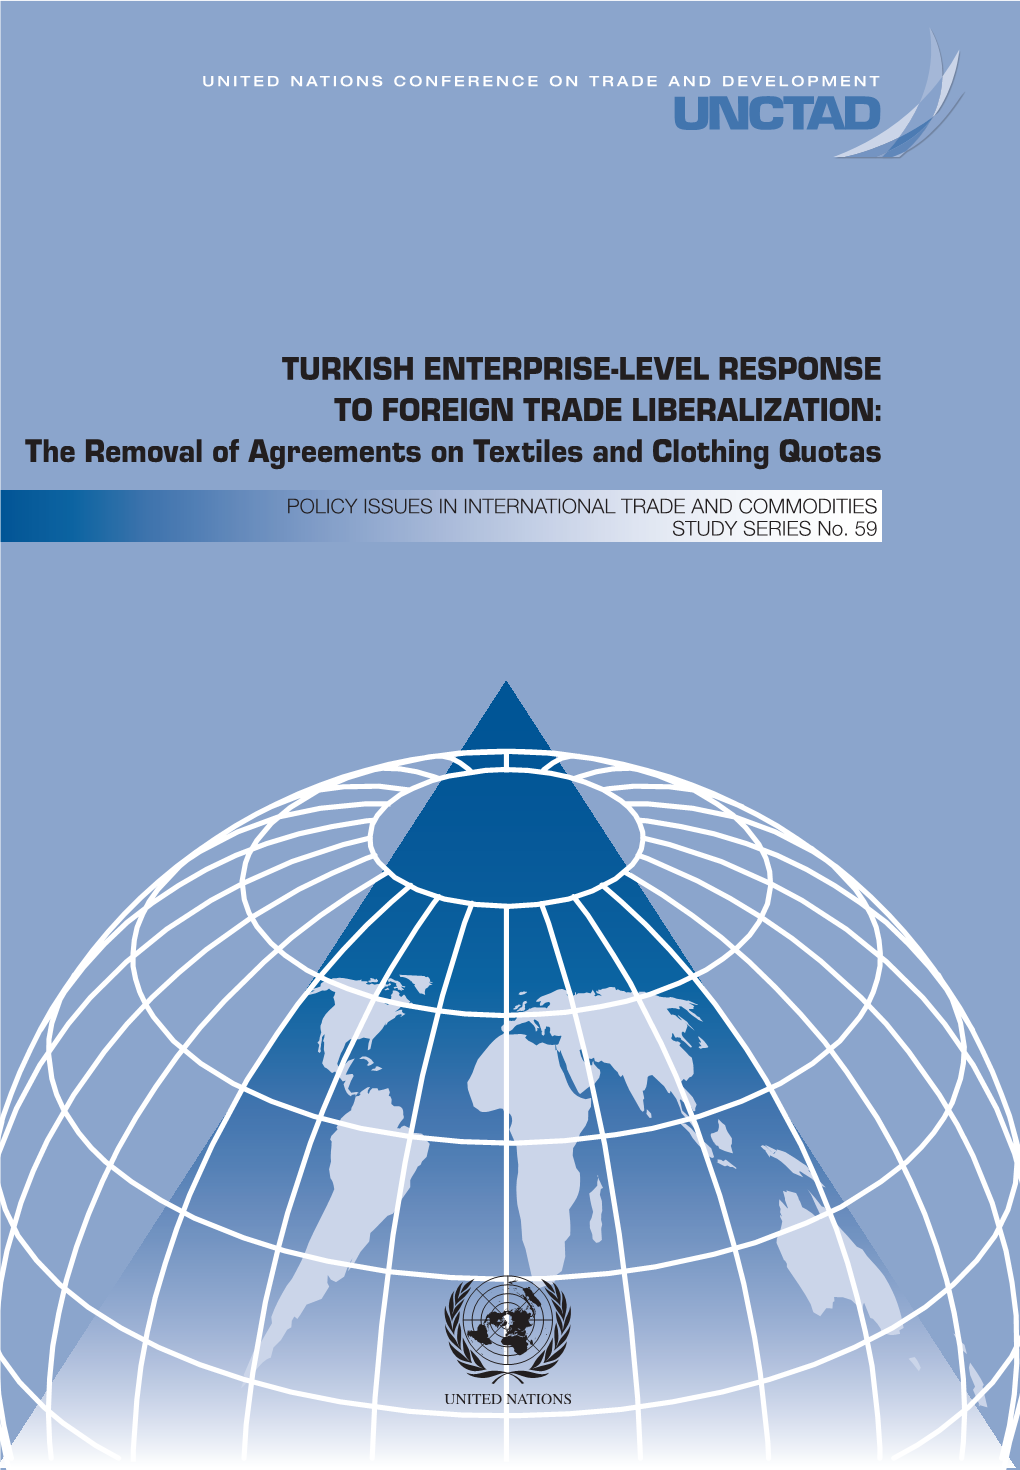 TURKISH ENTERPRISE-LEVEL RESPONSE to FOREIGN TRADE LIBERALIZATION: the Removal of Agreements on Textiles and Clothing Quotas